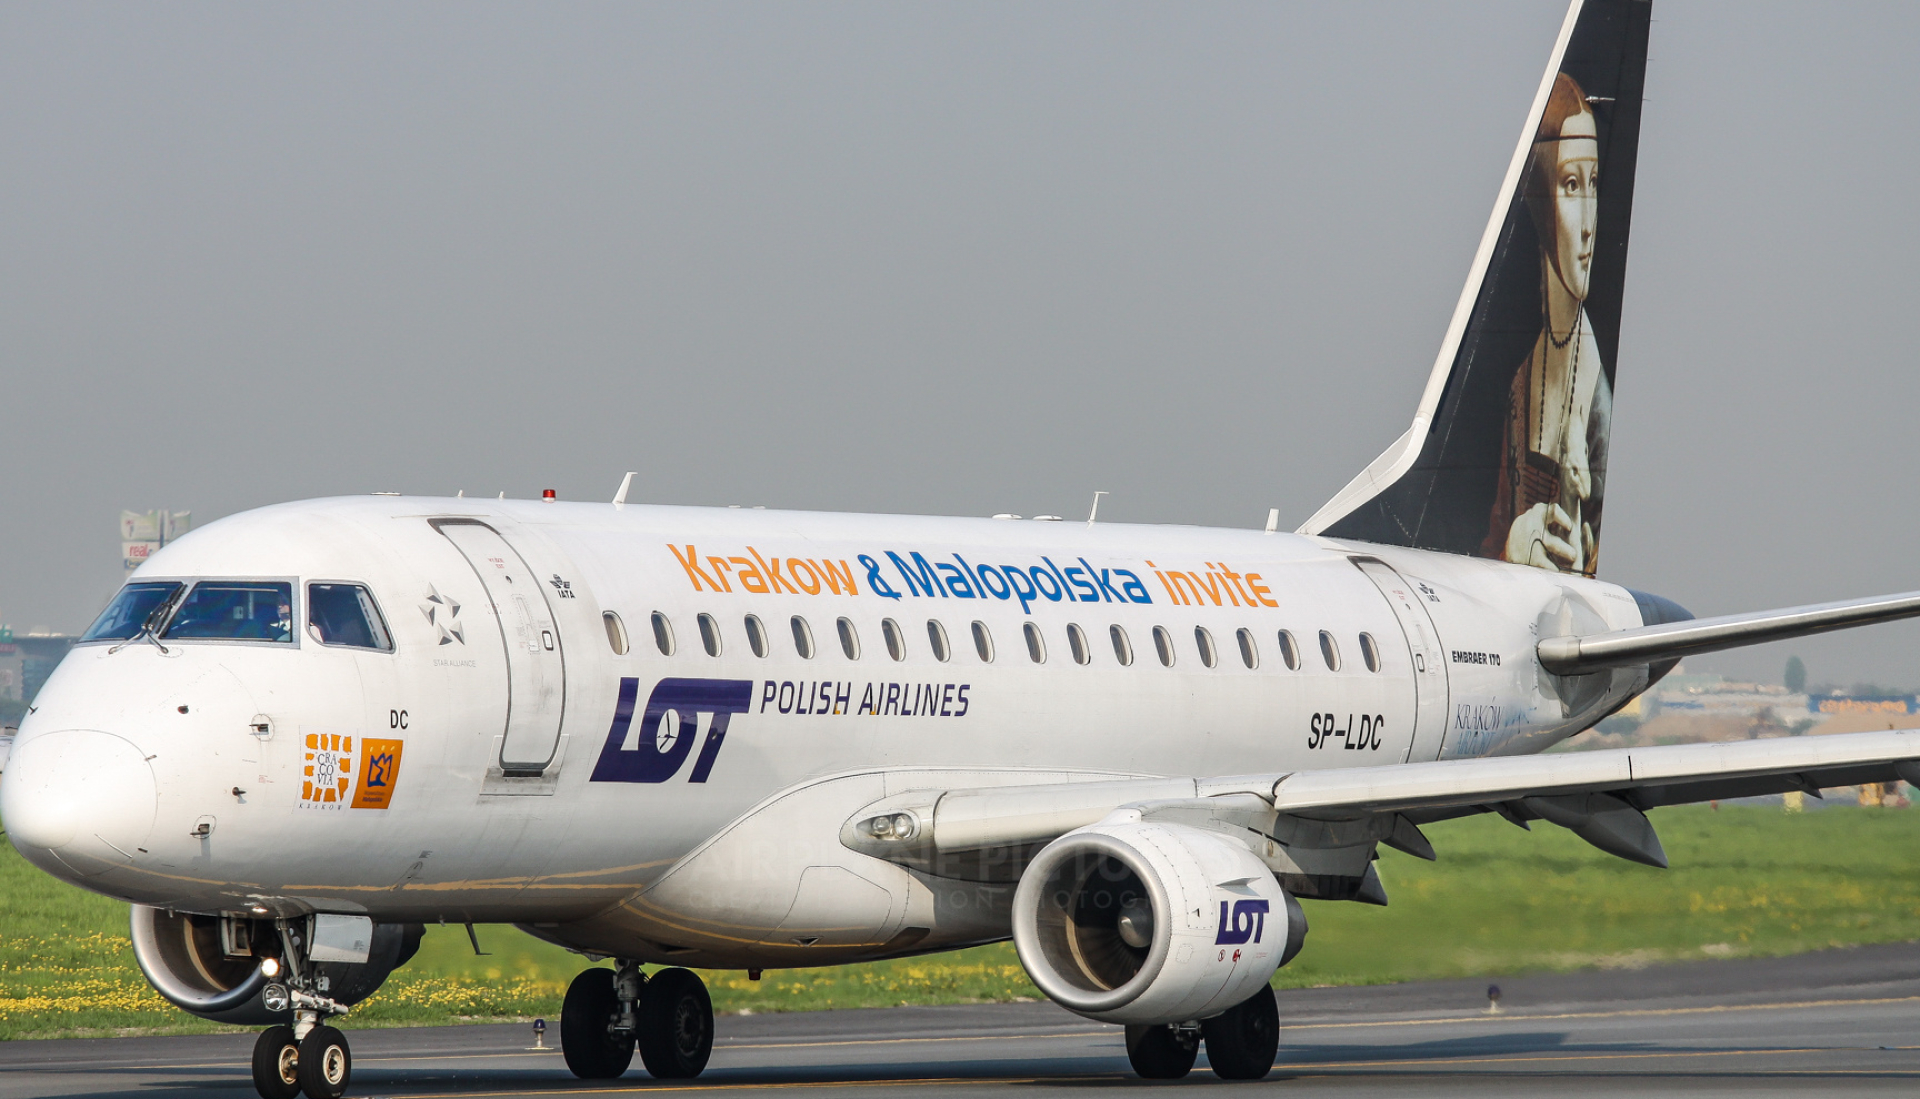 SP-LDC - LOT - Polish Airlines Embraer ERJ-170 170-100 at Warsaw - Frederic Chopin | Photo ID 1165054 1920x1100